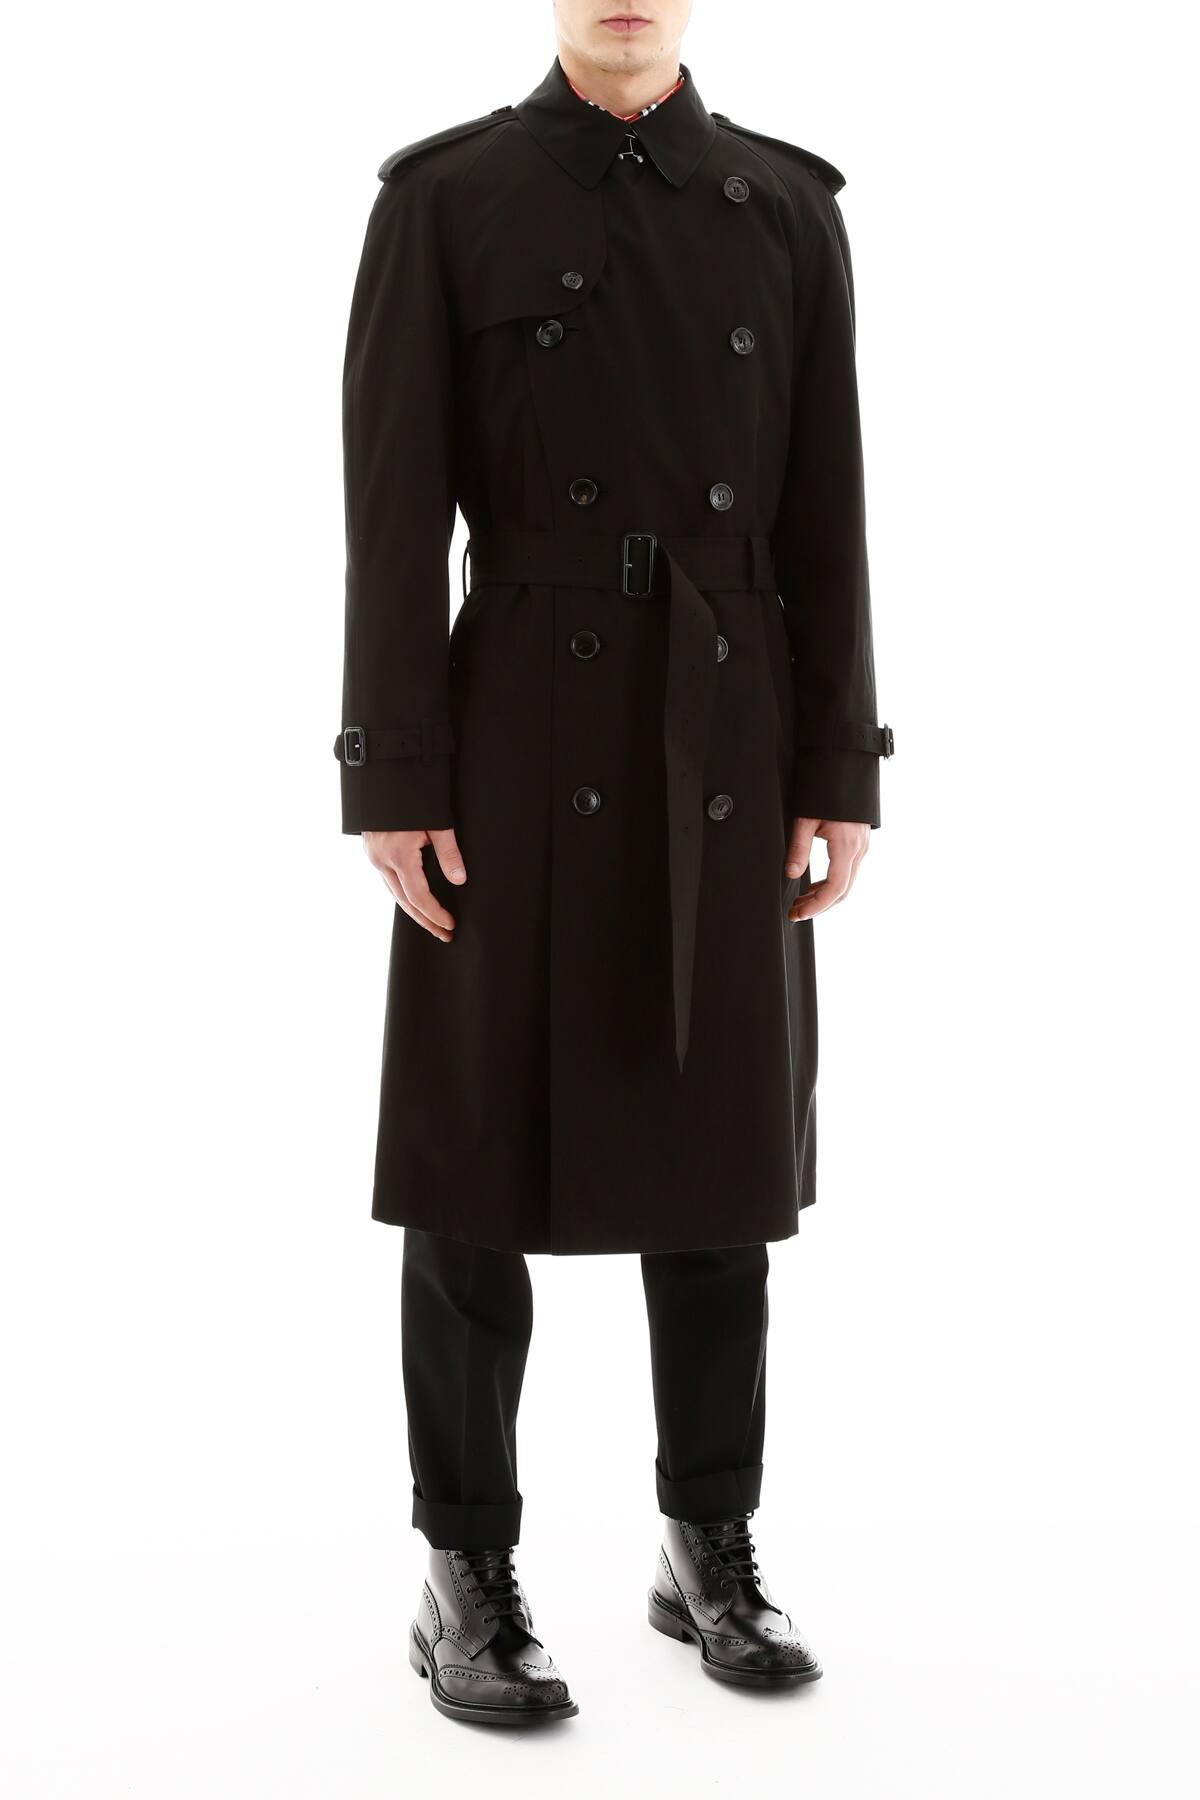 Burberry Cotton Long Westminster Trench Coat in Black for Men - Lyst